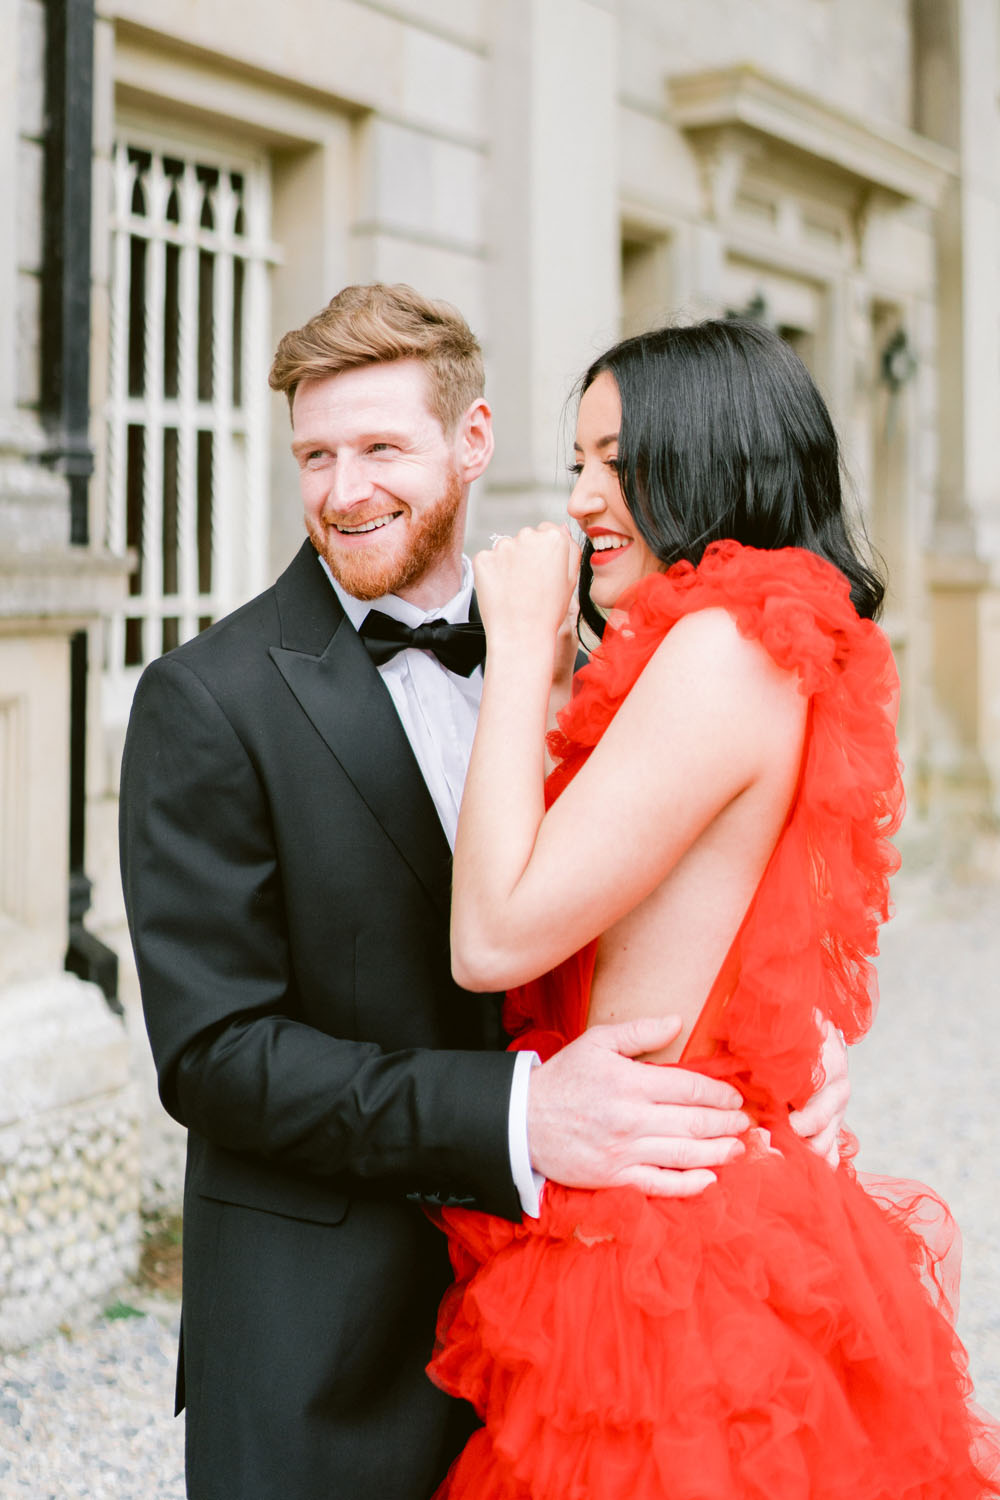 Glamorous Valentine's Day wedding ideas with a stunning red dress